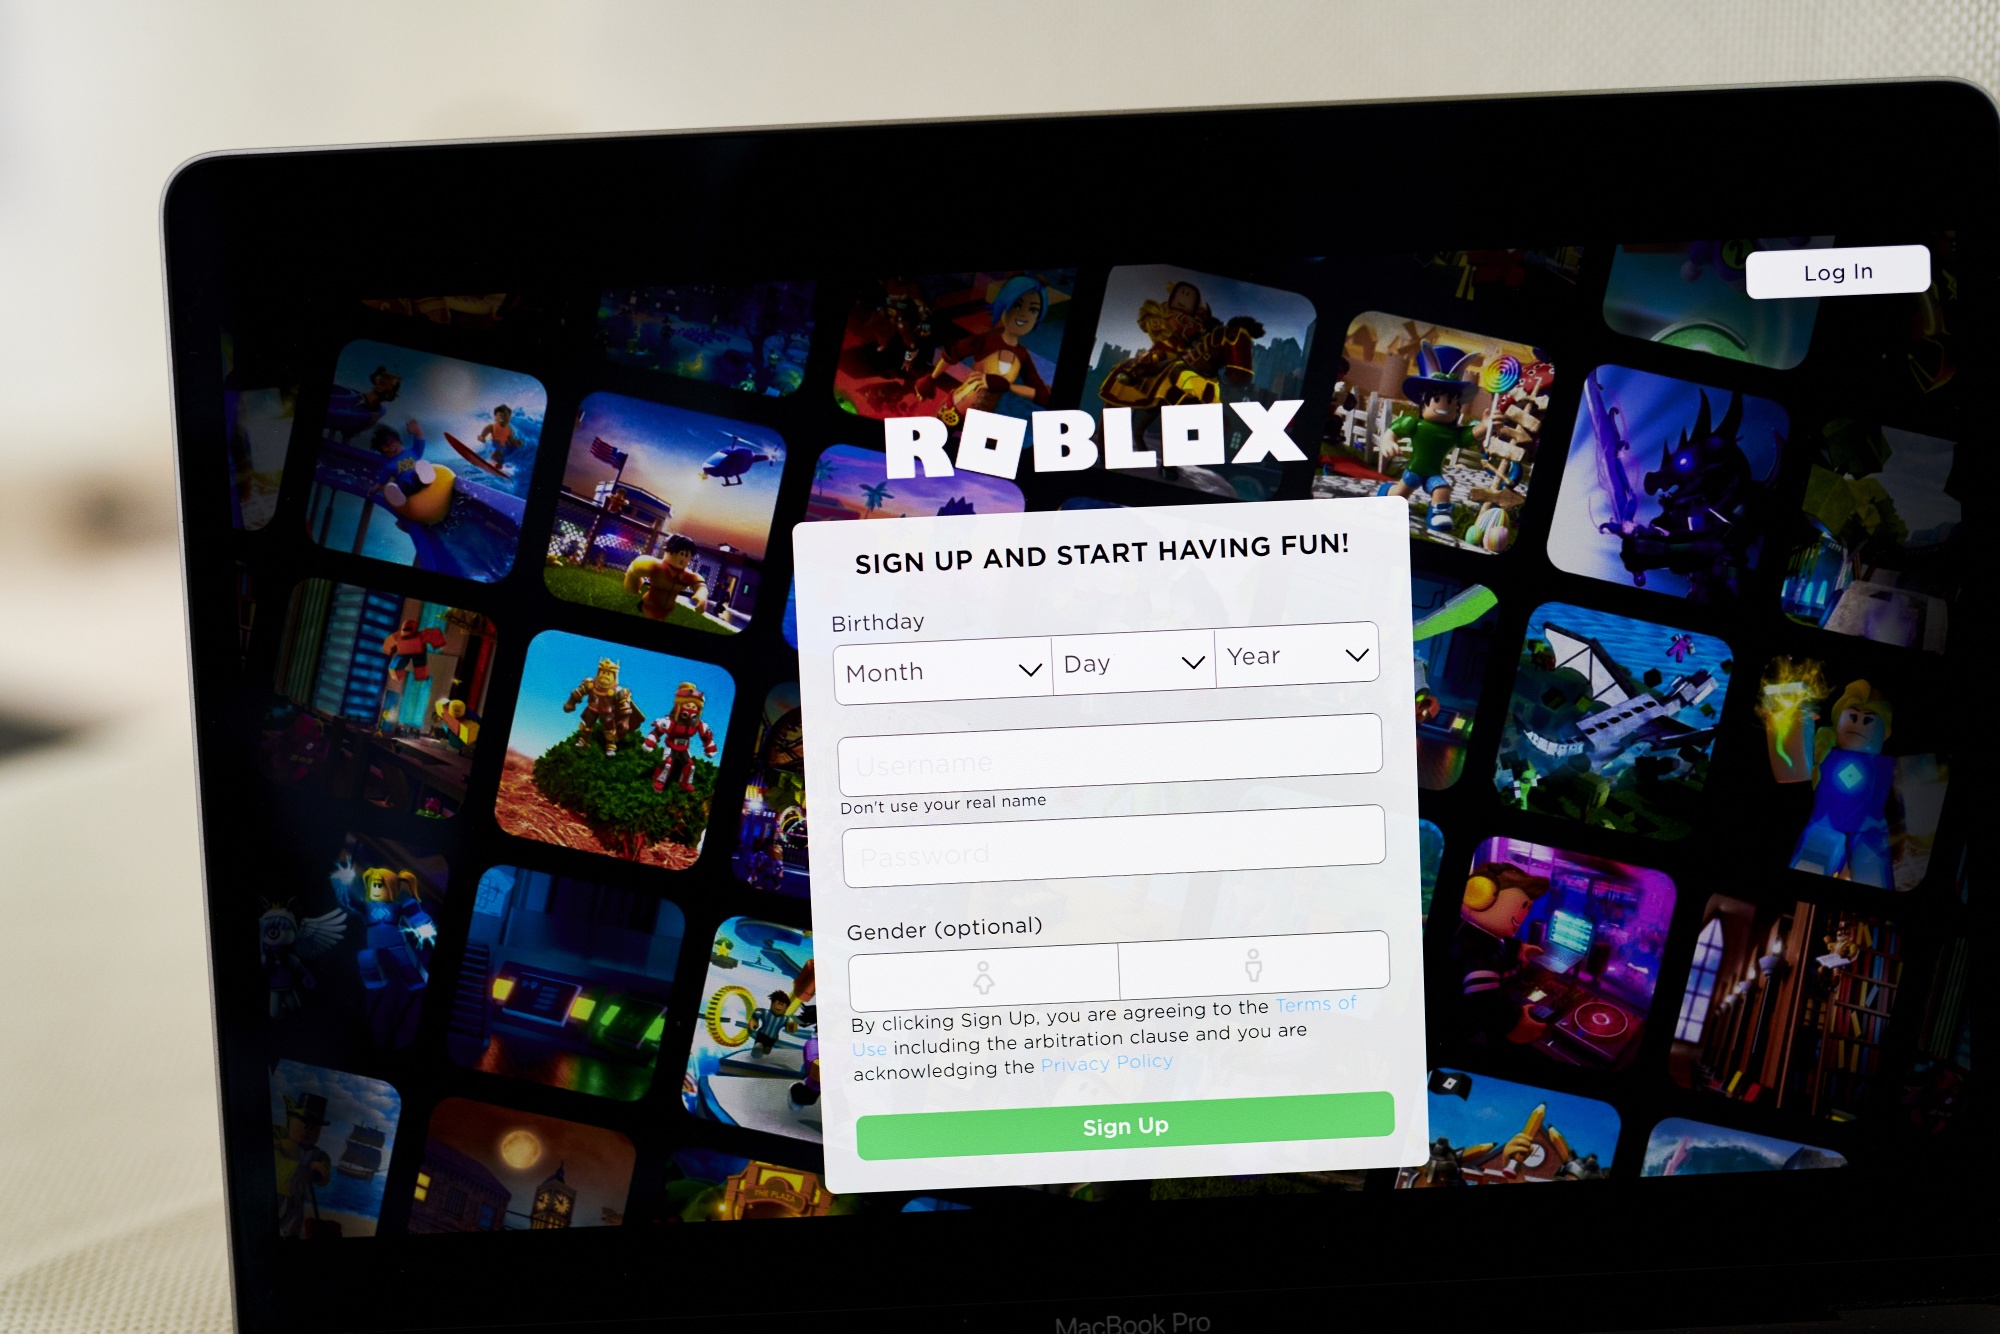 Roblox CEO: 'We're being very, very careful in China